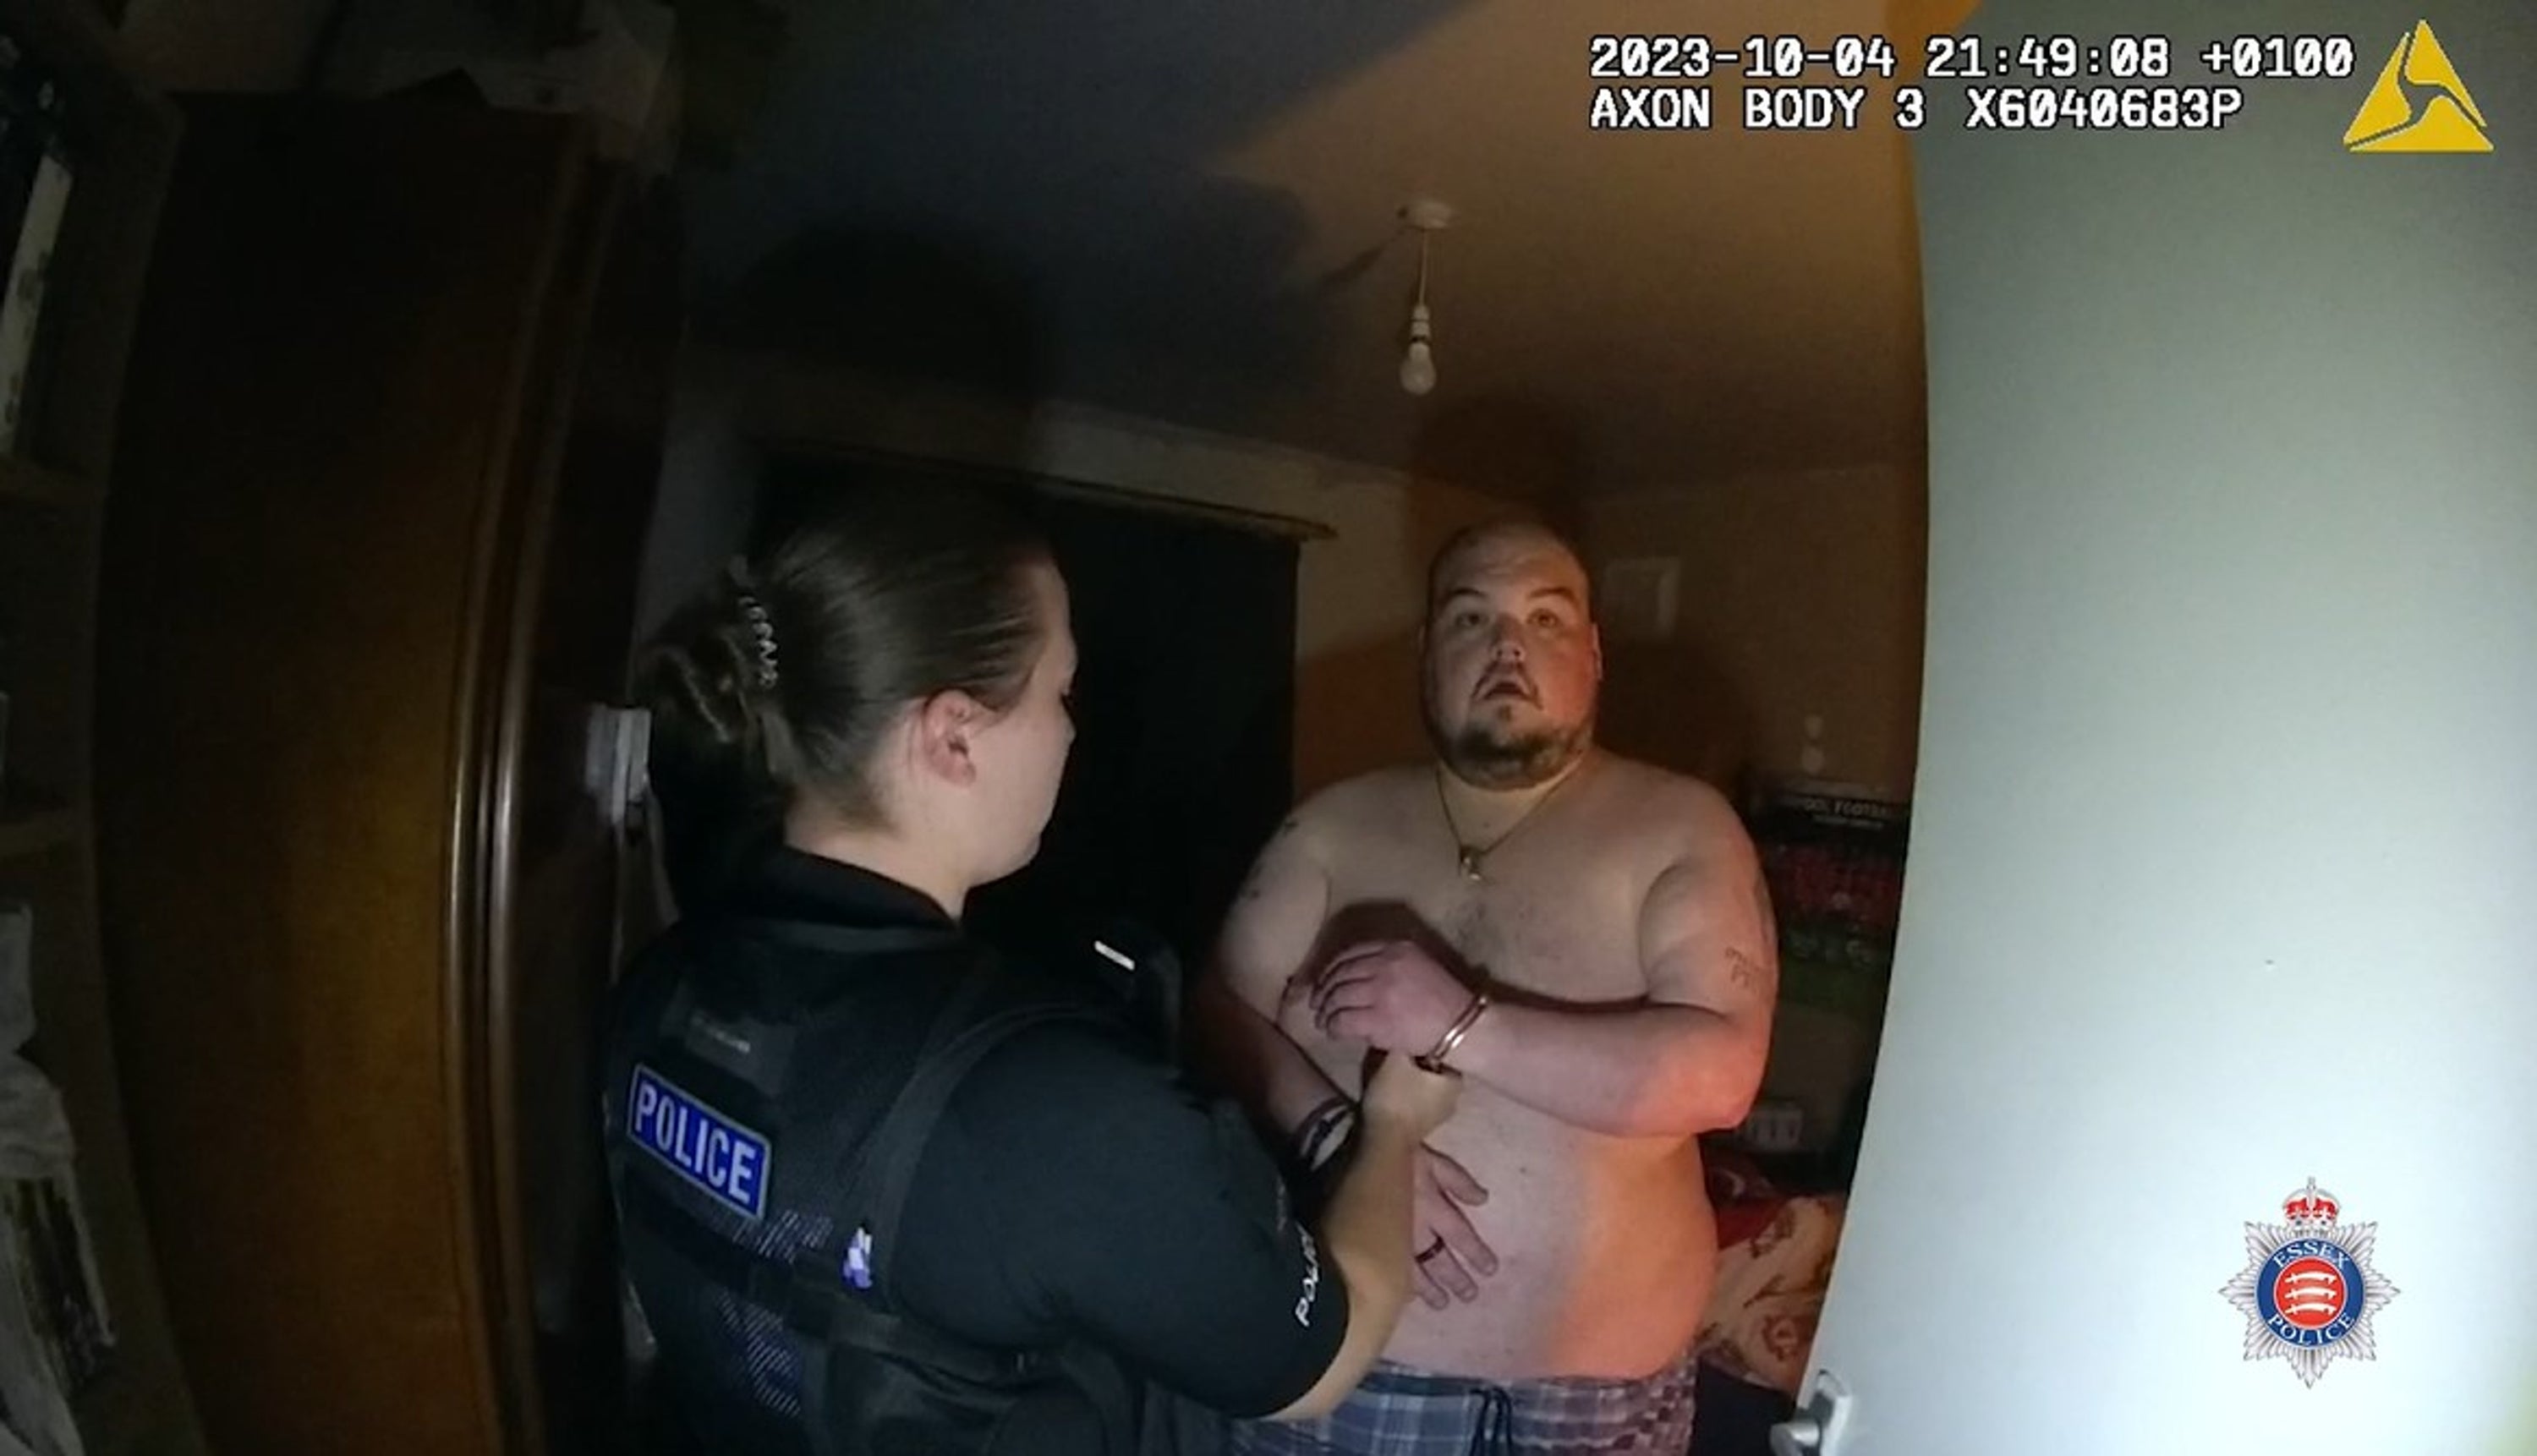 Police body-worn video footage of the arrest of Gavin Plumb - who has been found guilty at Chelmsford Crown Court